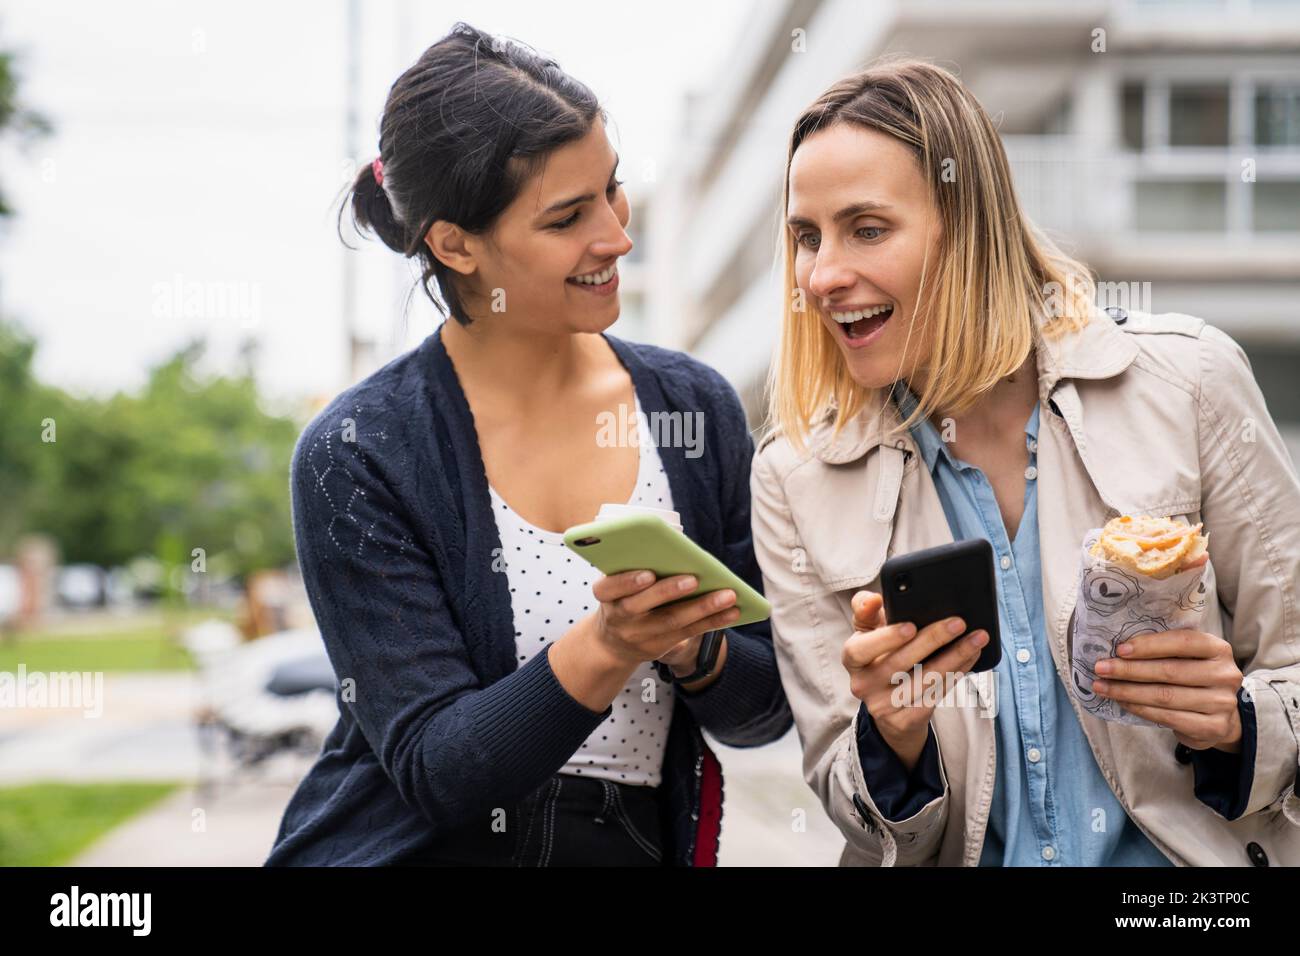 Mid-shot front view photo of two female digital nomads sharing their postings online with their smartphones Stock Photo